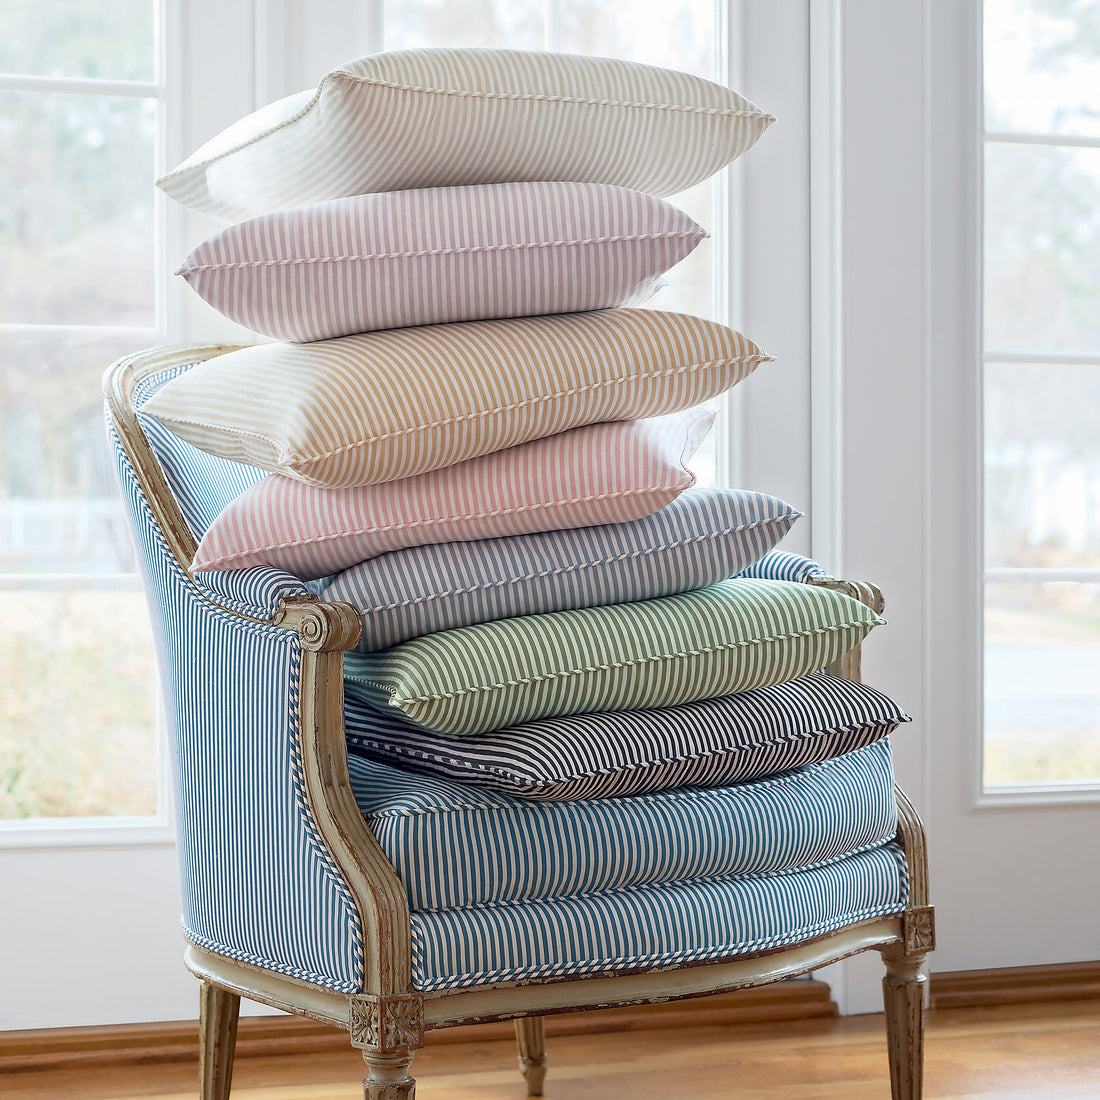 Collection of chair and pillow fabrics in Holden Stripe woven fabric featuring lavender color fabric - pattern number AW57802 - by Anna French in the Bristol collection